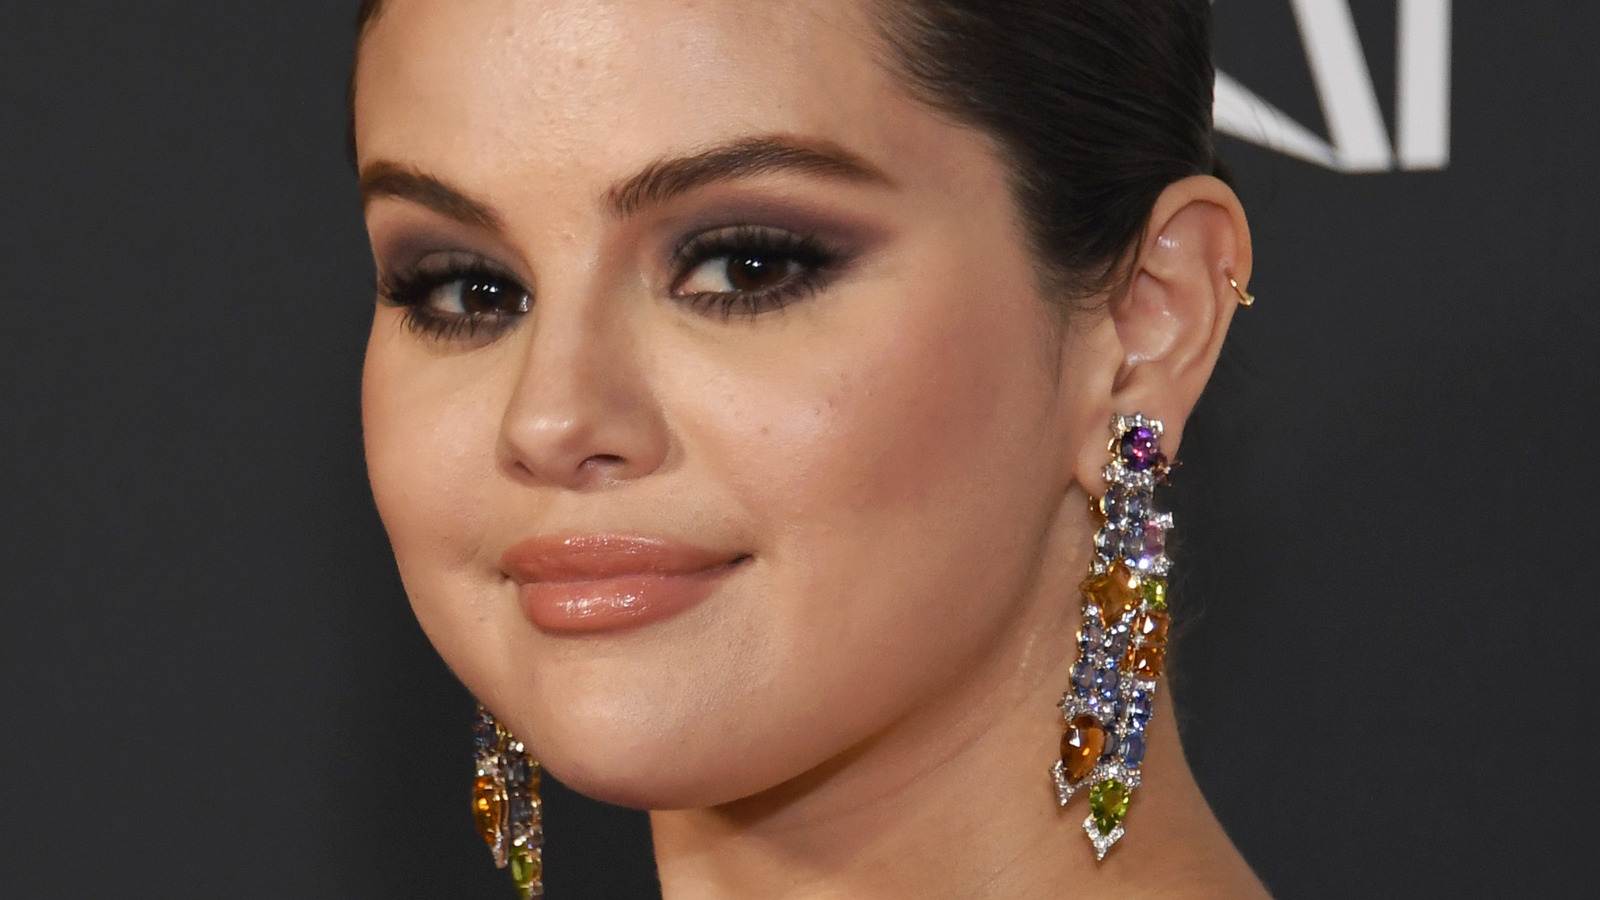 Selena Gomez And Zayn Maliks Romance Might Have Started Earlier Than We Originally Thought